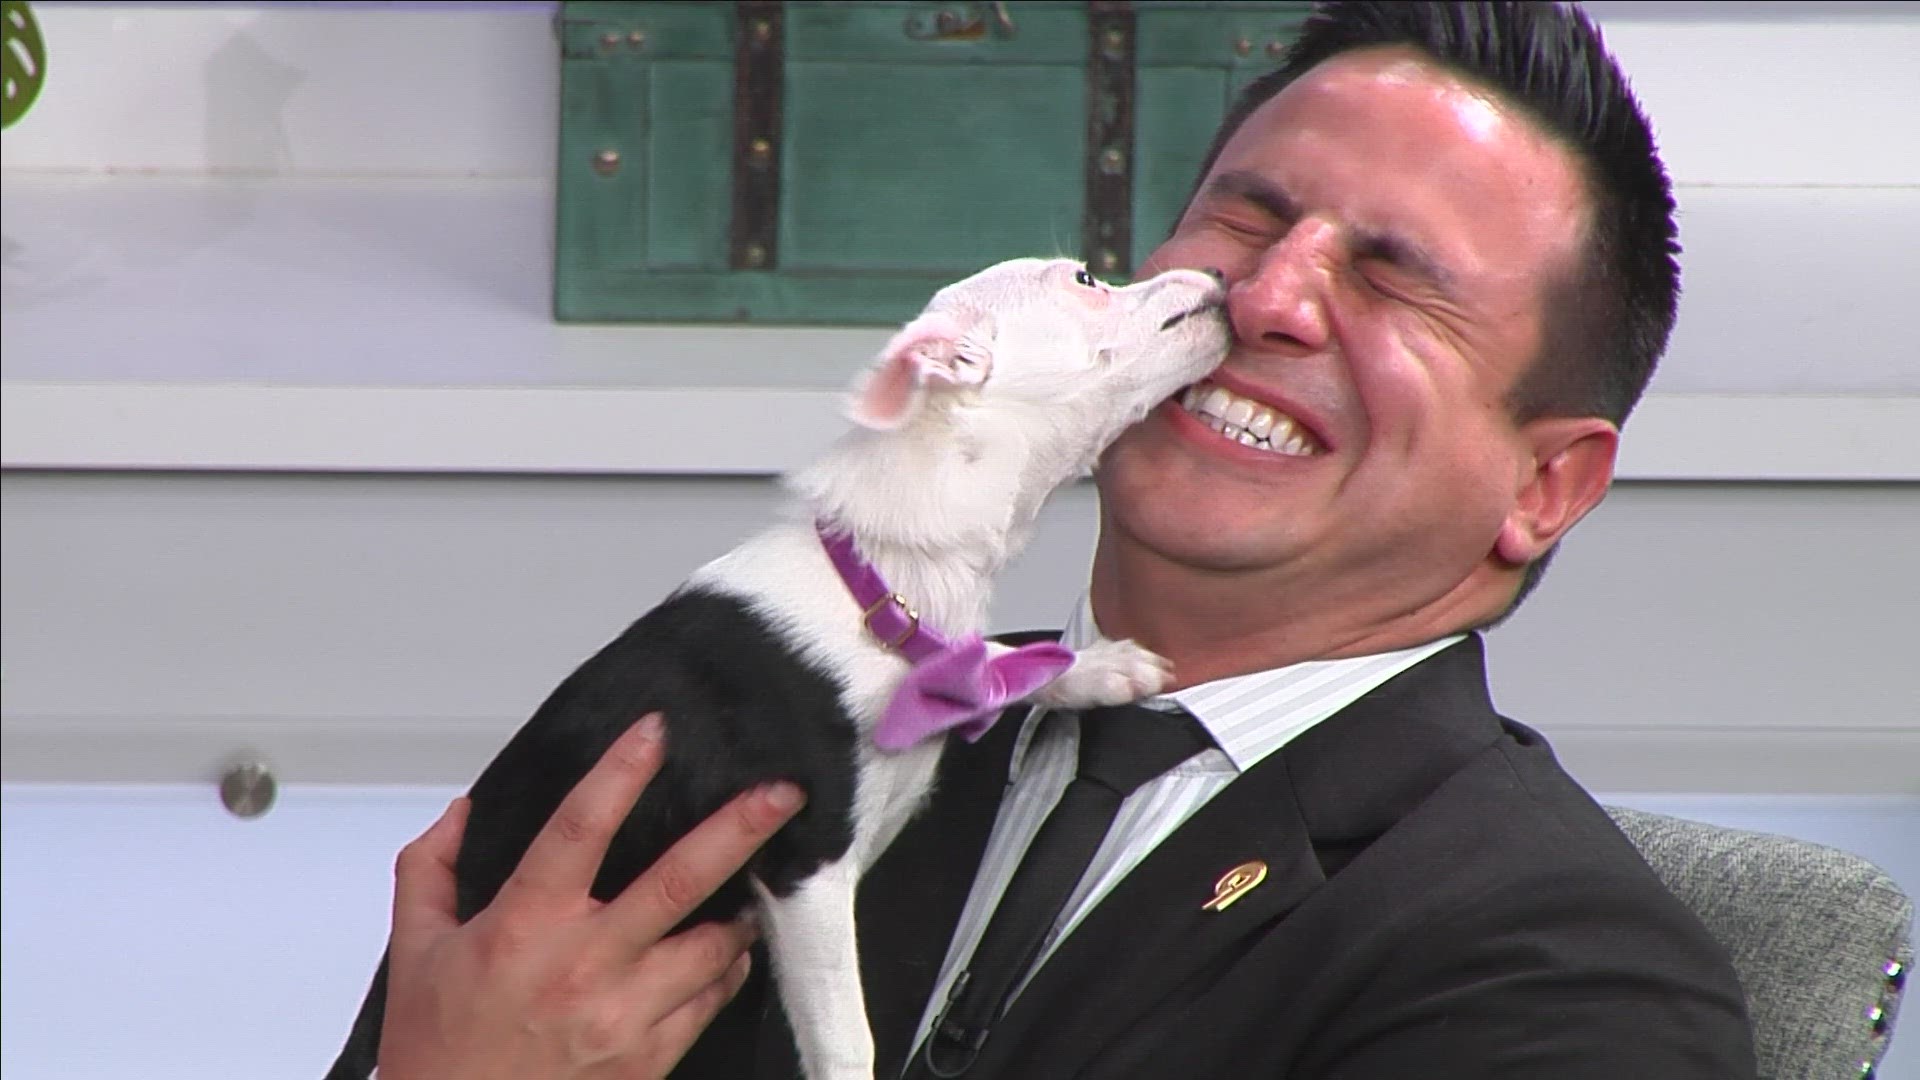 Three-month-old Maebel, who is available for adoption from the NoCo Humane Society in Loveland, gave 9NEWS Anchor Jordan Chavez a face bath Friday morning.